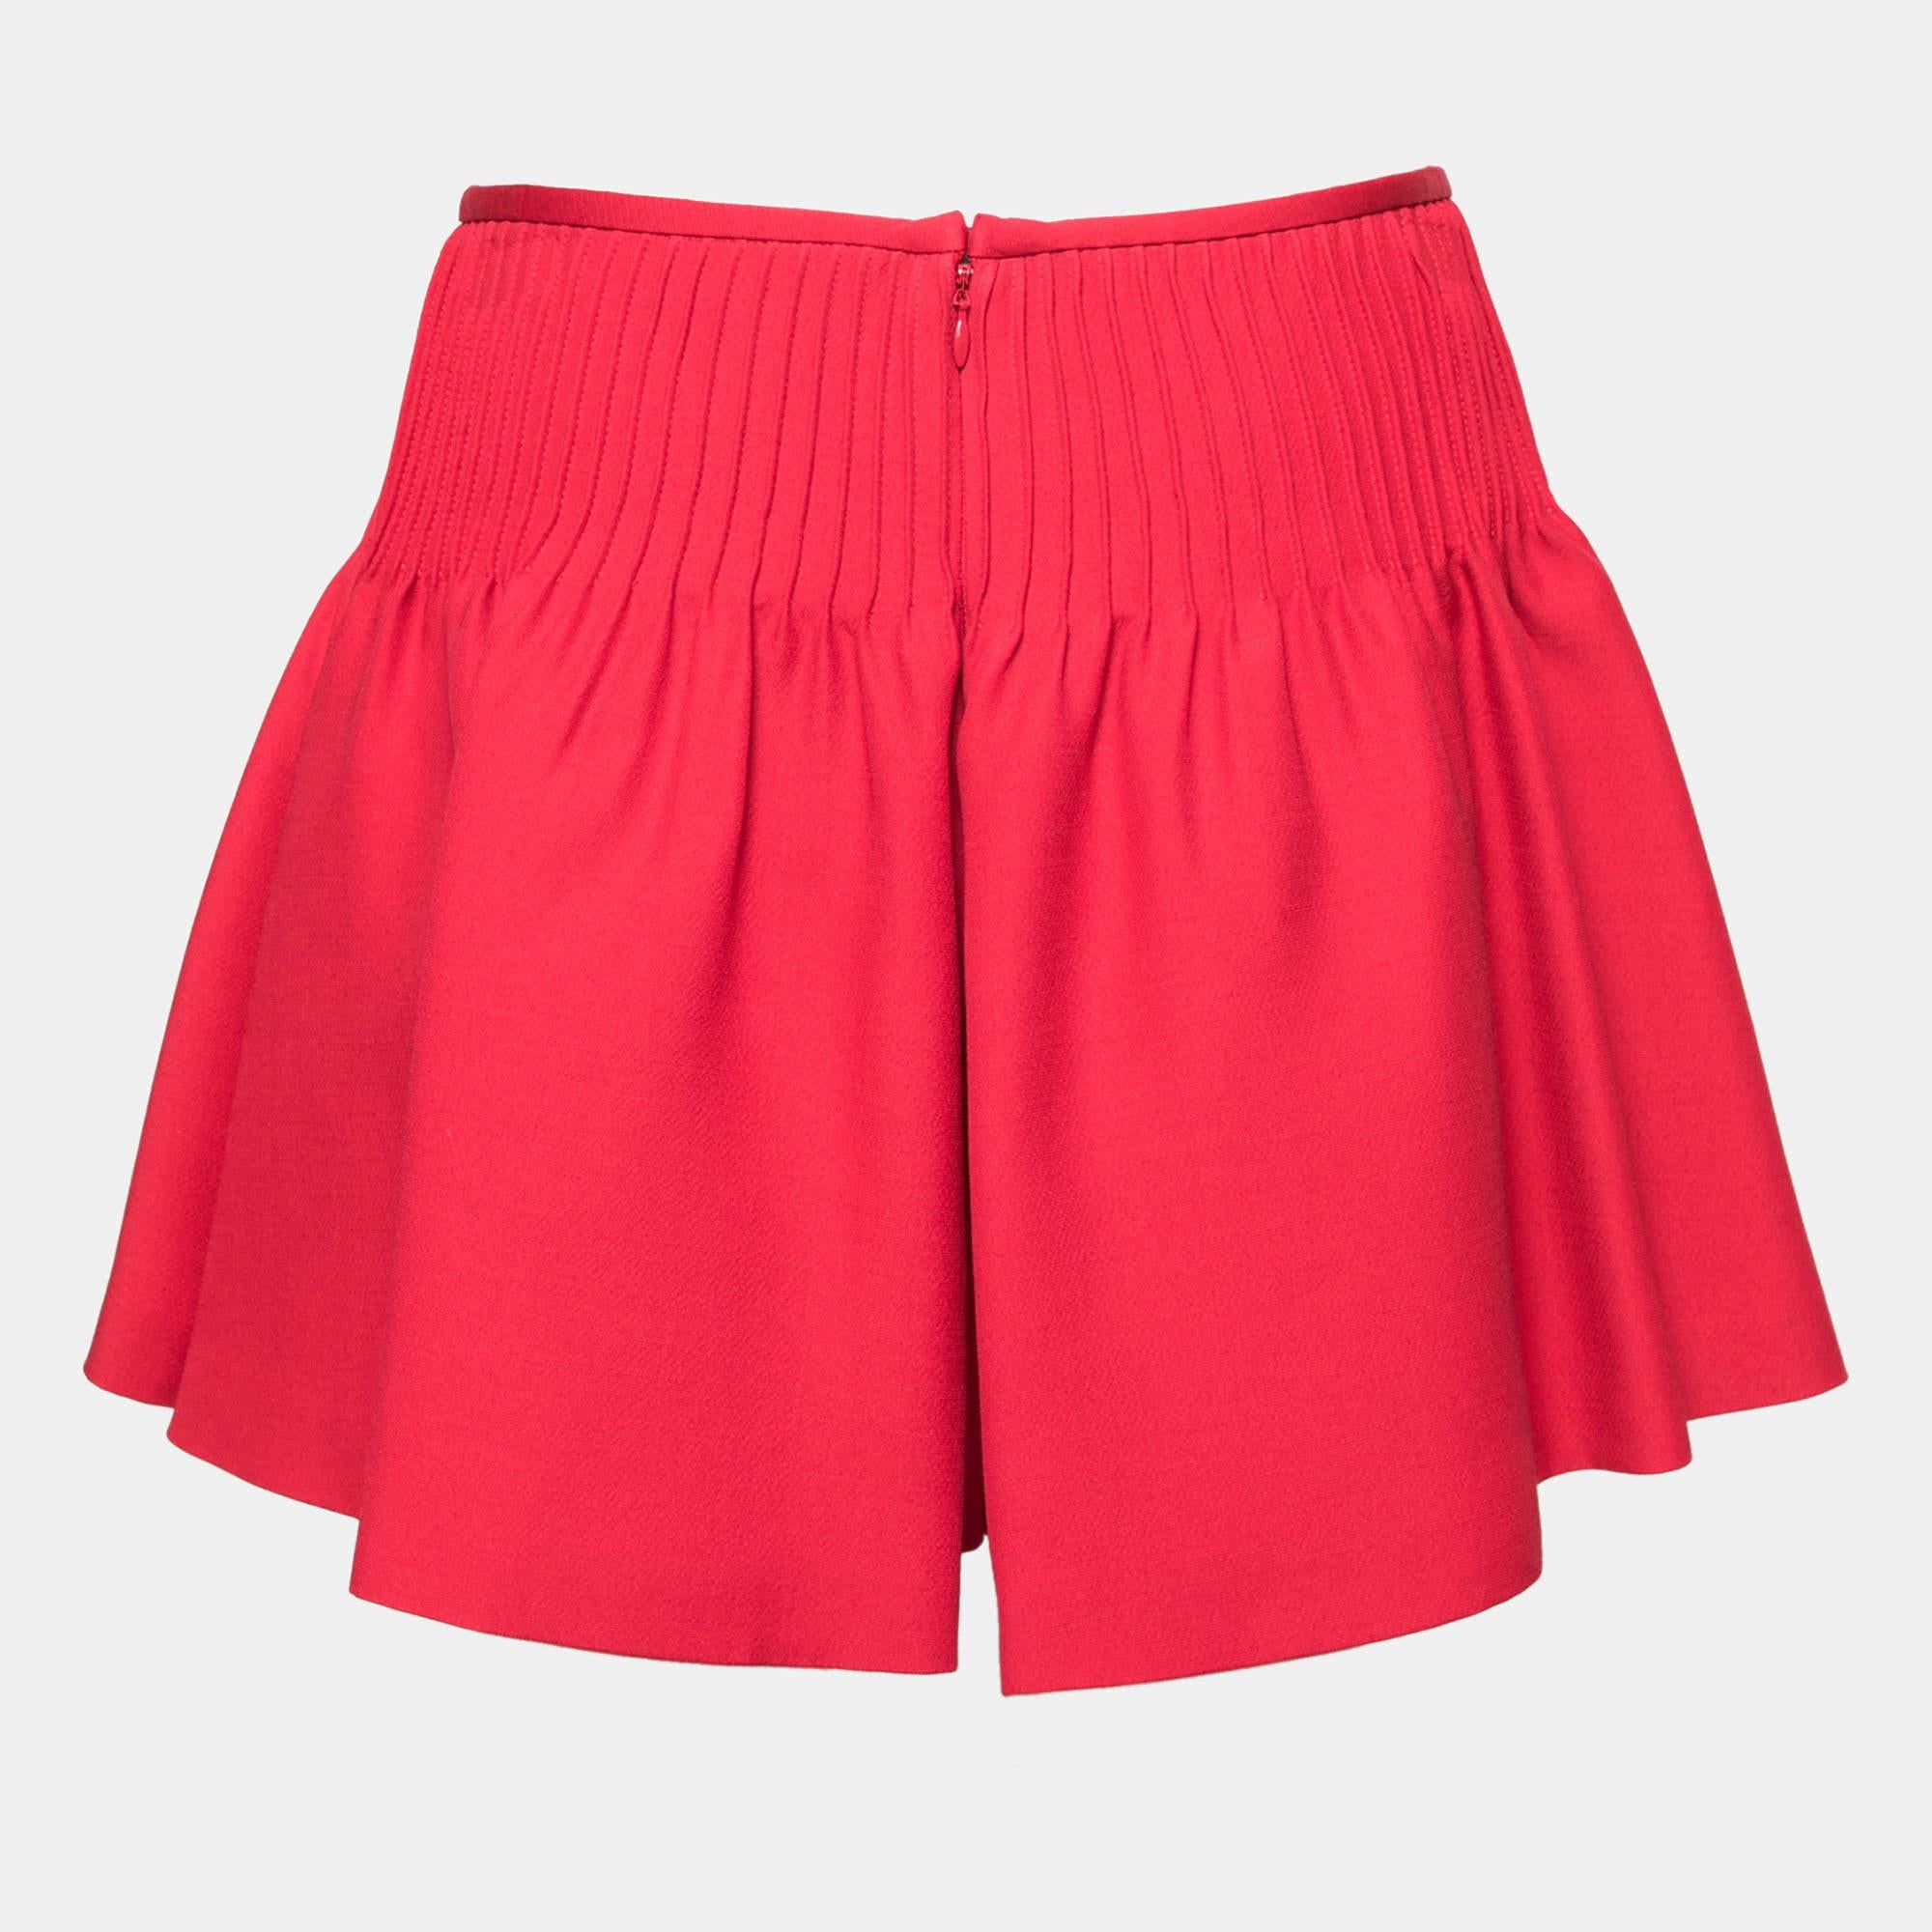 These shorts hail from the iconic house of Valentino. Crafted from wool and silk, they flaunt a lovely shade of red. They are great for a day off or a holiday. Pair with a simple t-shirt and slides.

Includes: Brand tag